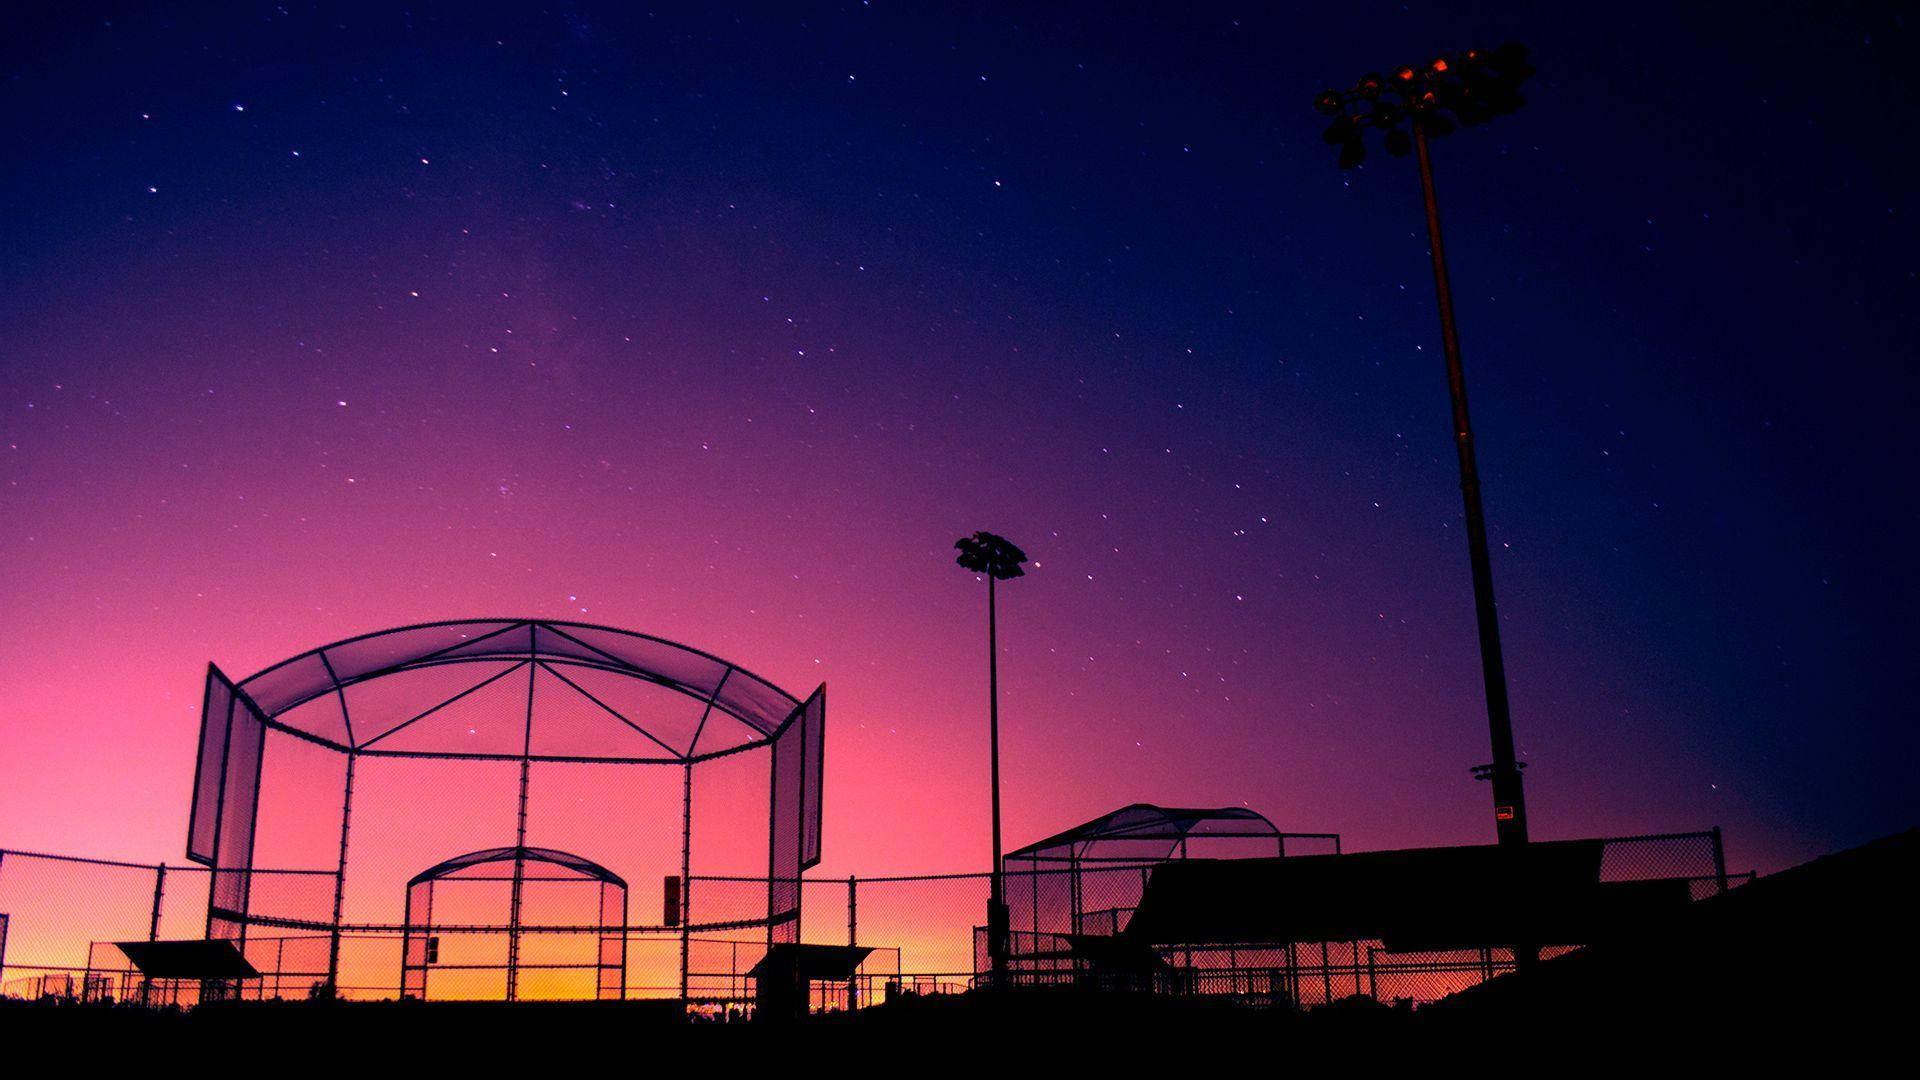 Awesome Softball Arena At Dusk Wallpaper